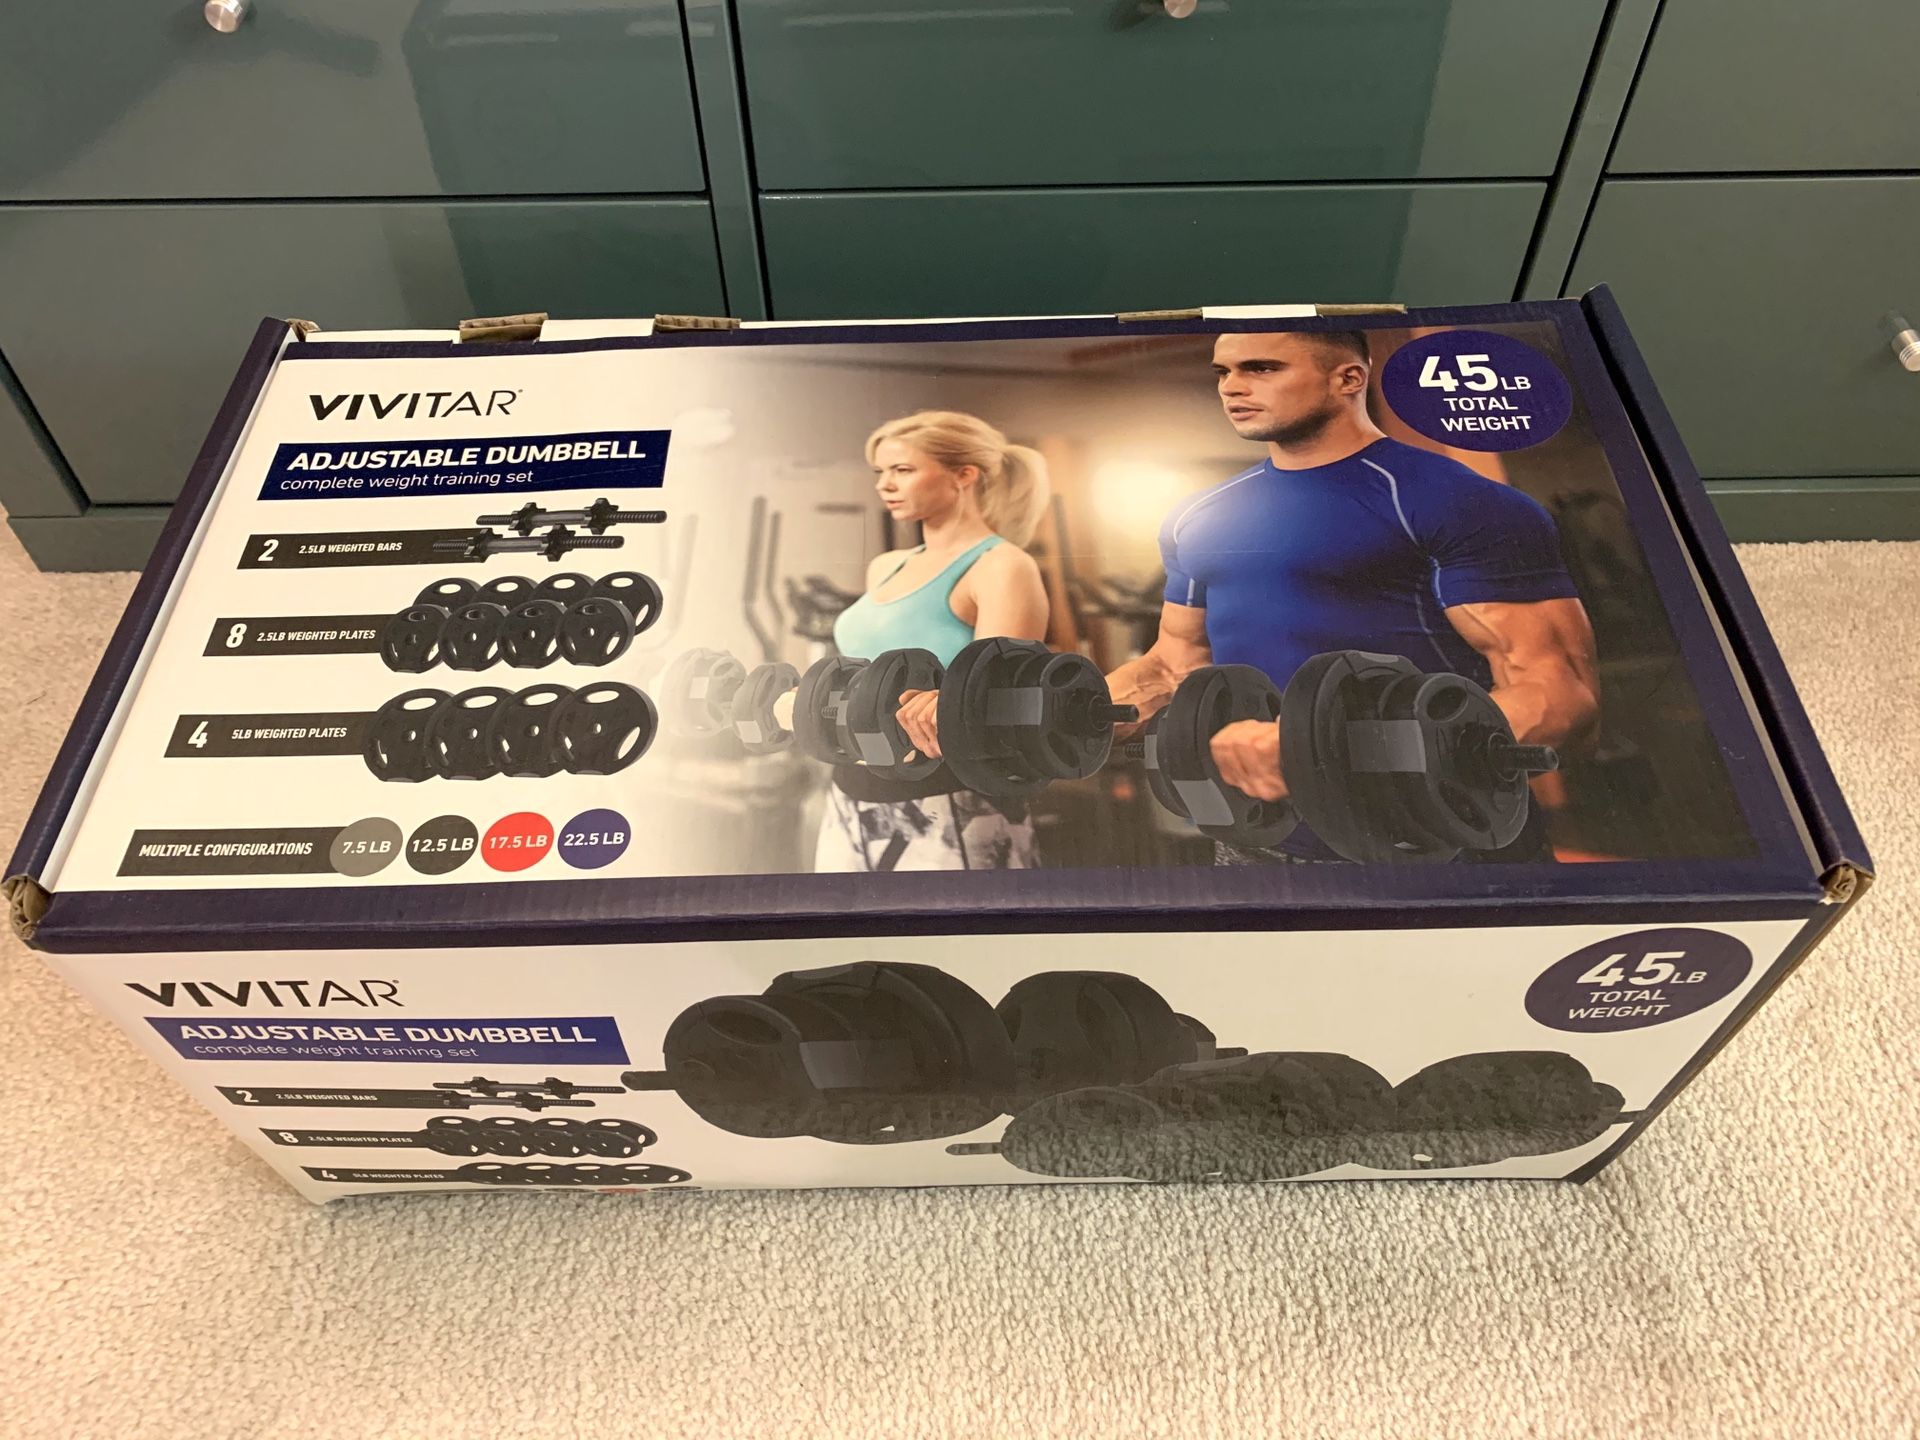 Brand new Vivitar adjustable dumbbell complete weight training set 45LB total weight